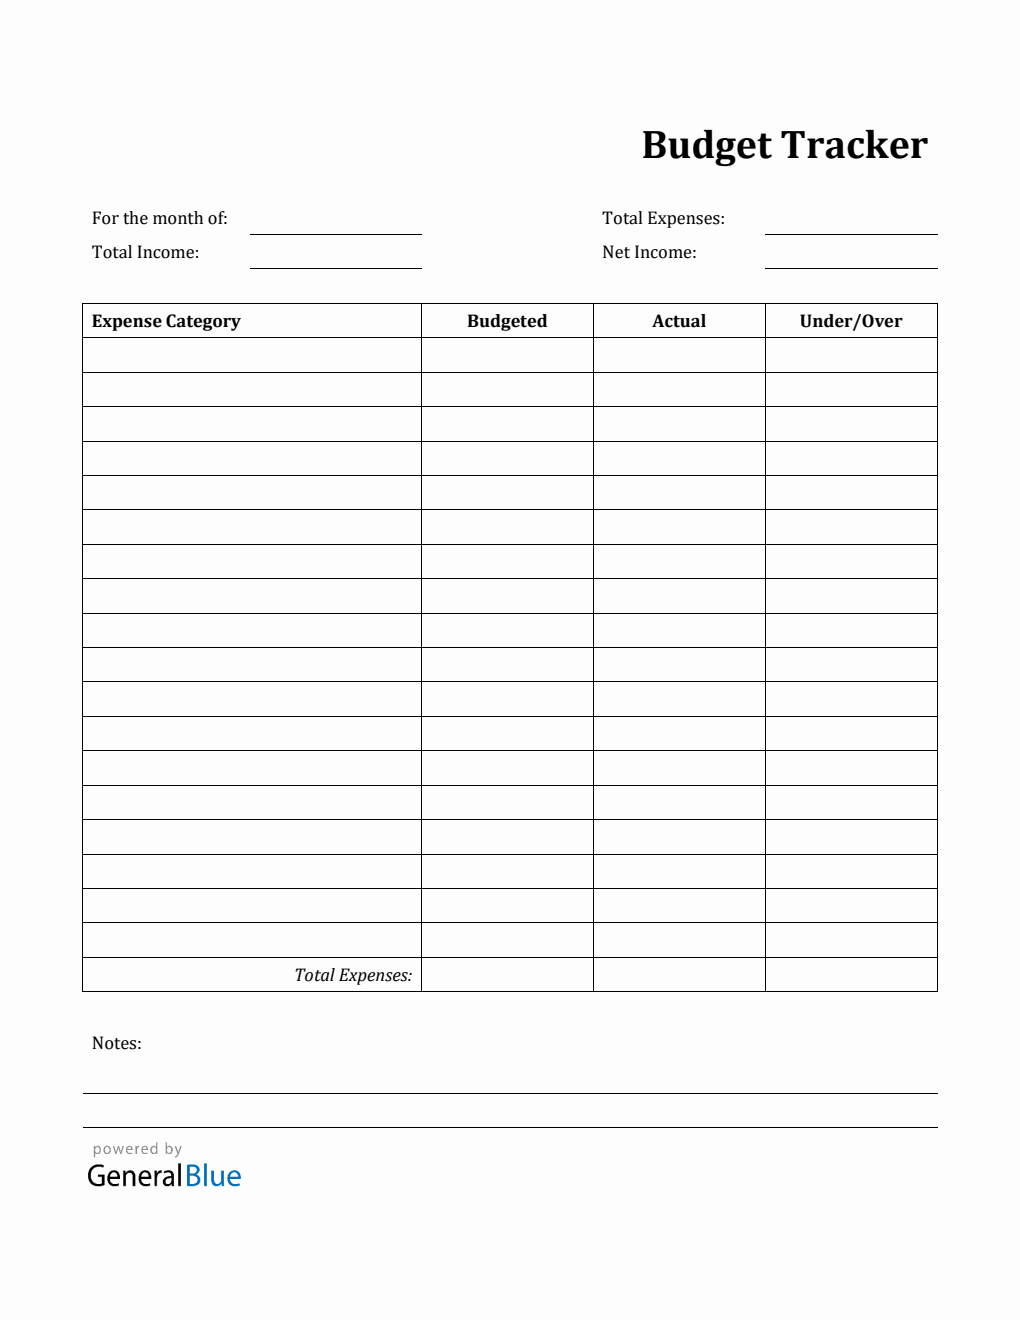 Printable Budget Tracker in Word